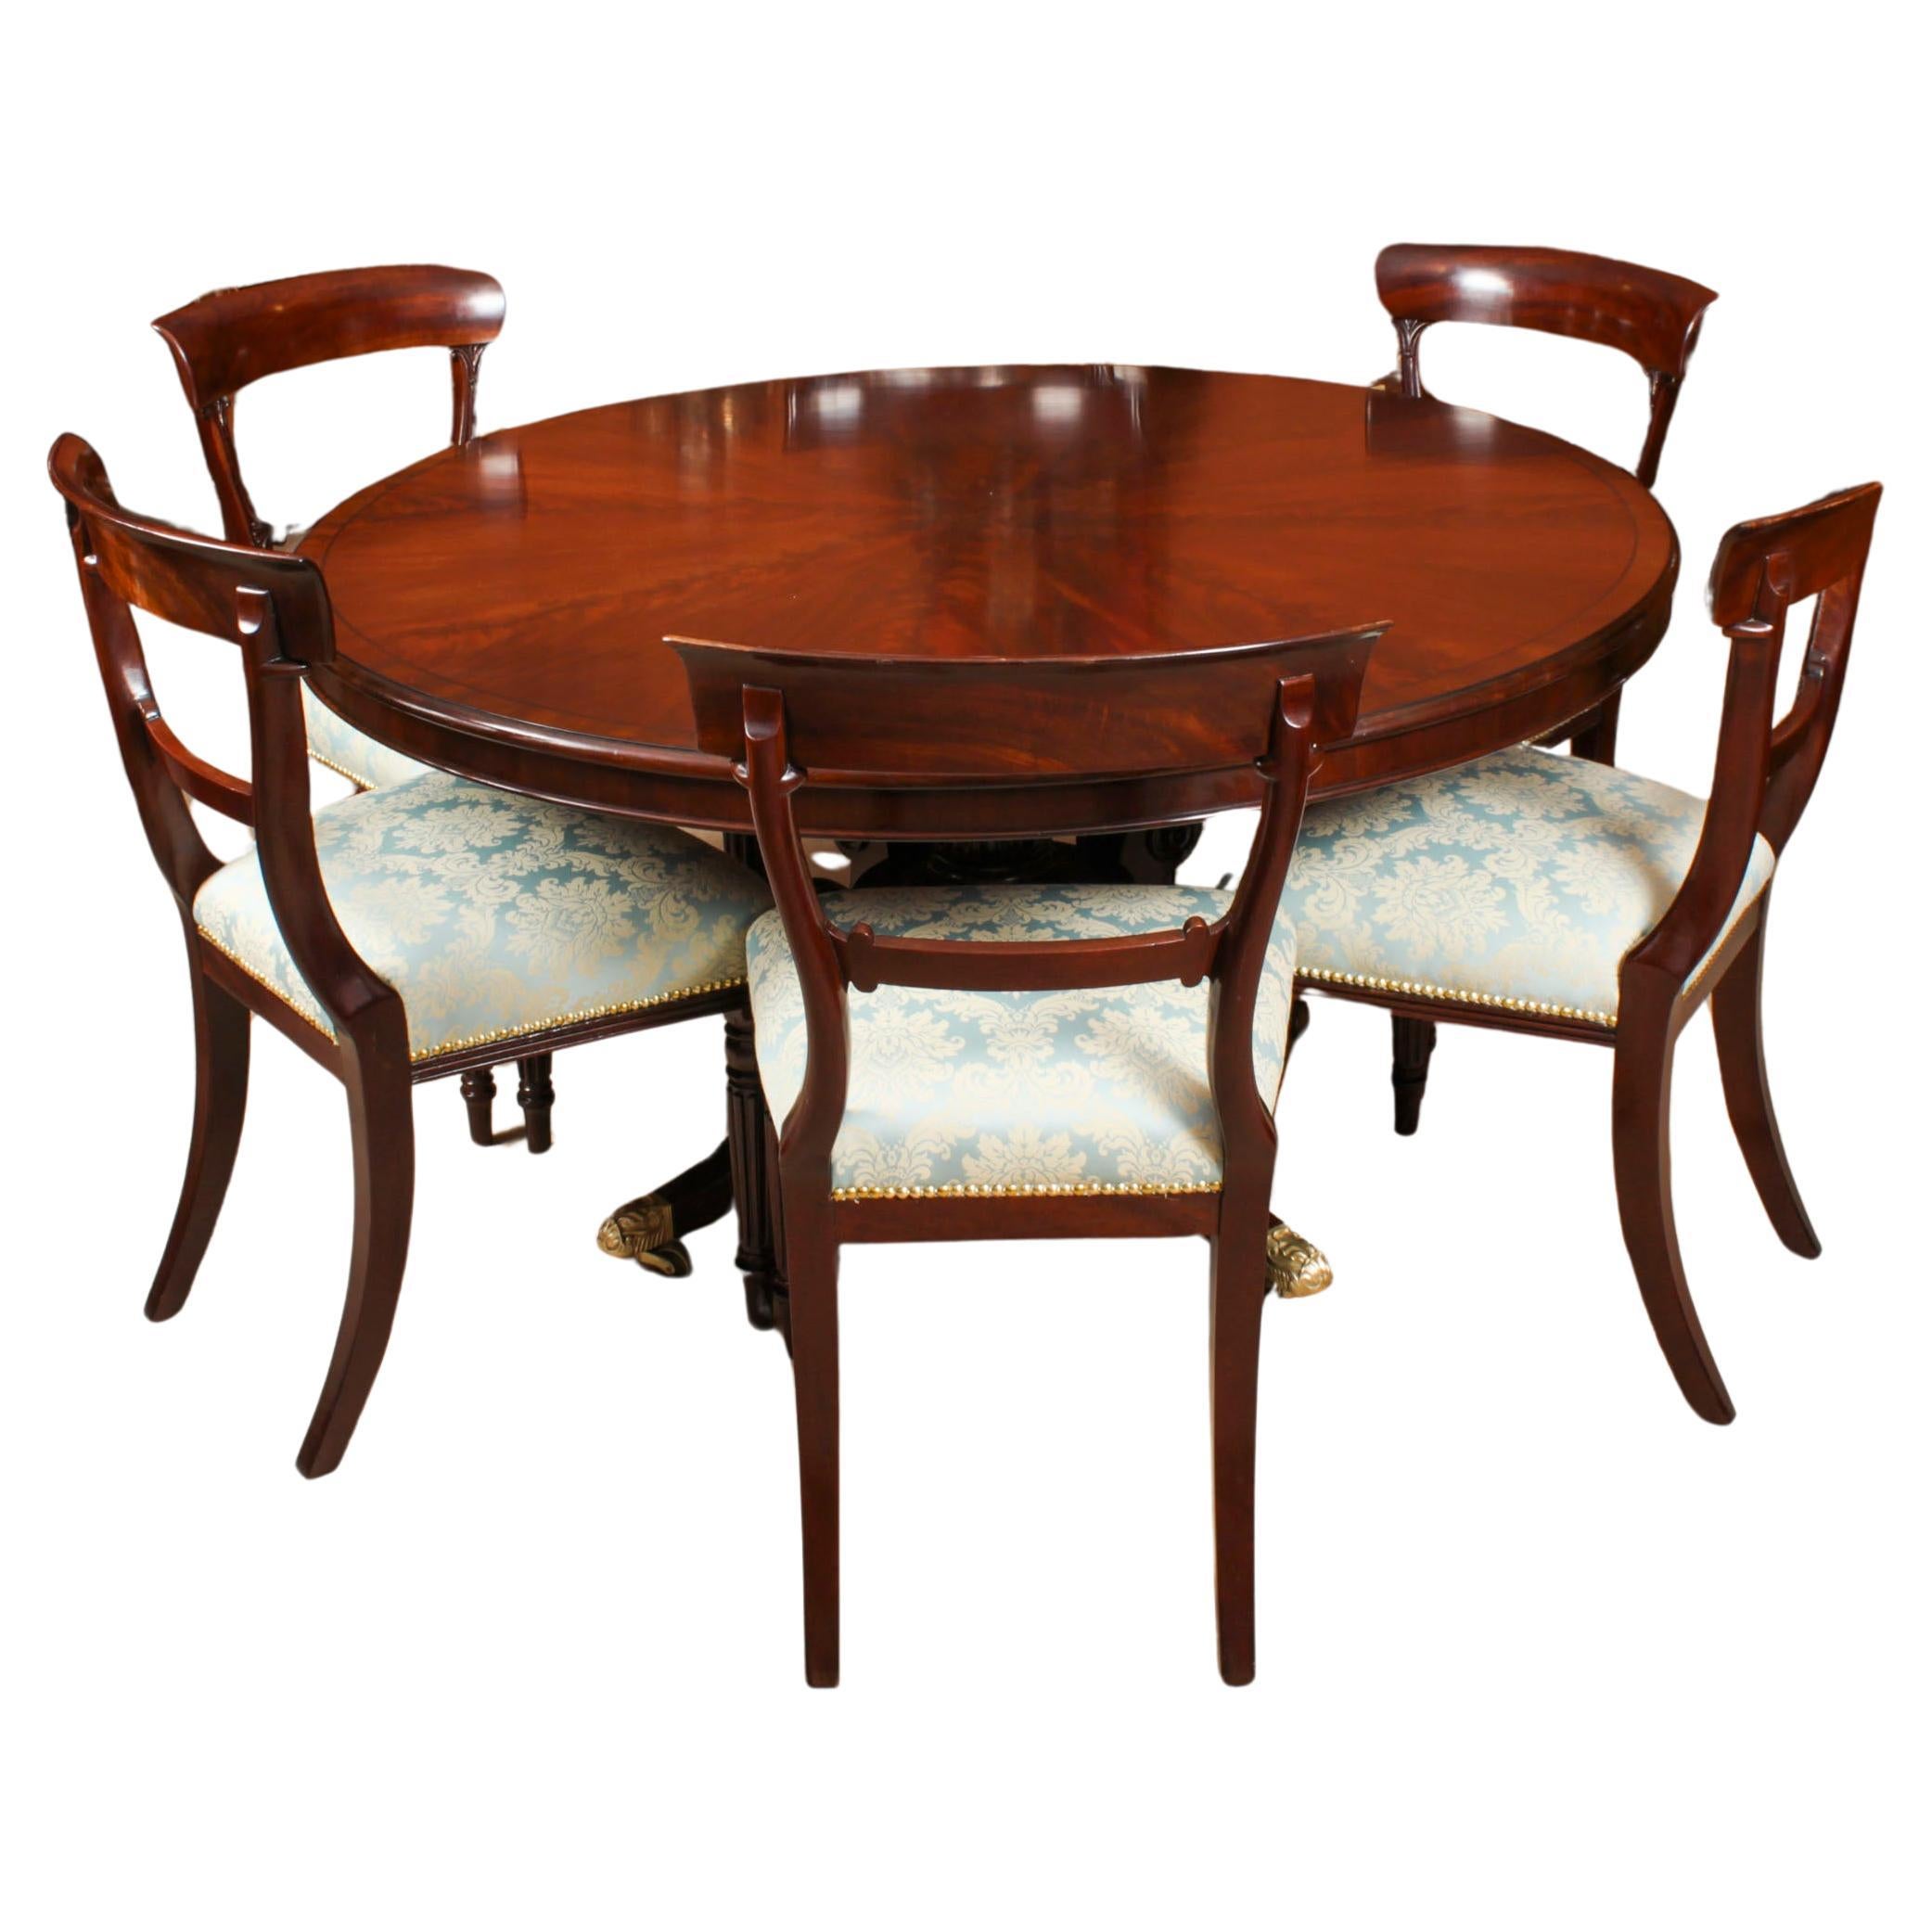 Antique William IV Loo Dining Table & 6 chairs 19th Century For Sale